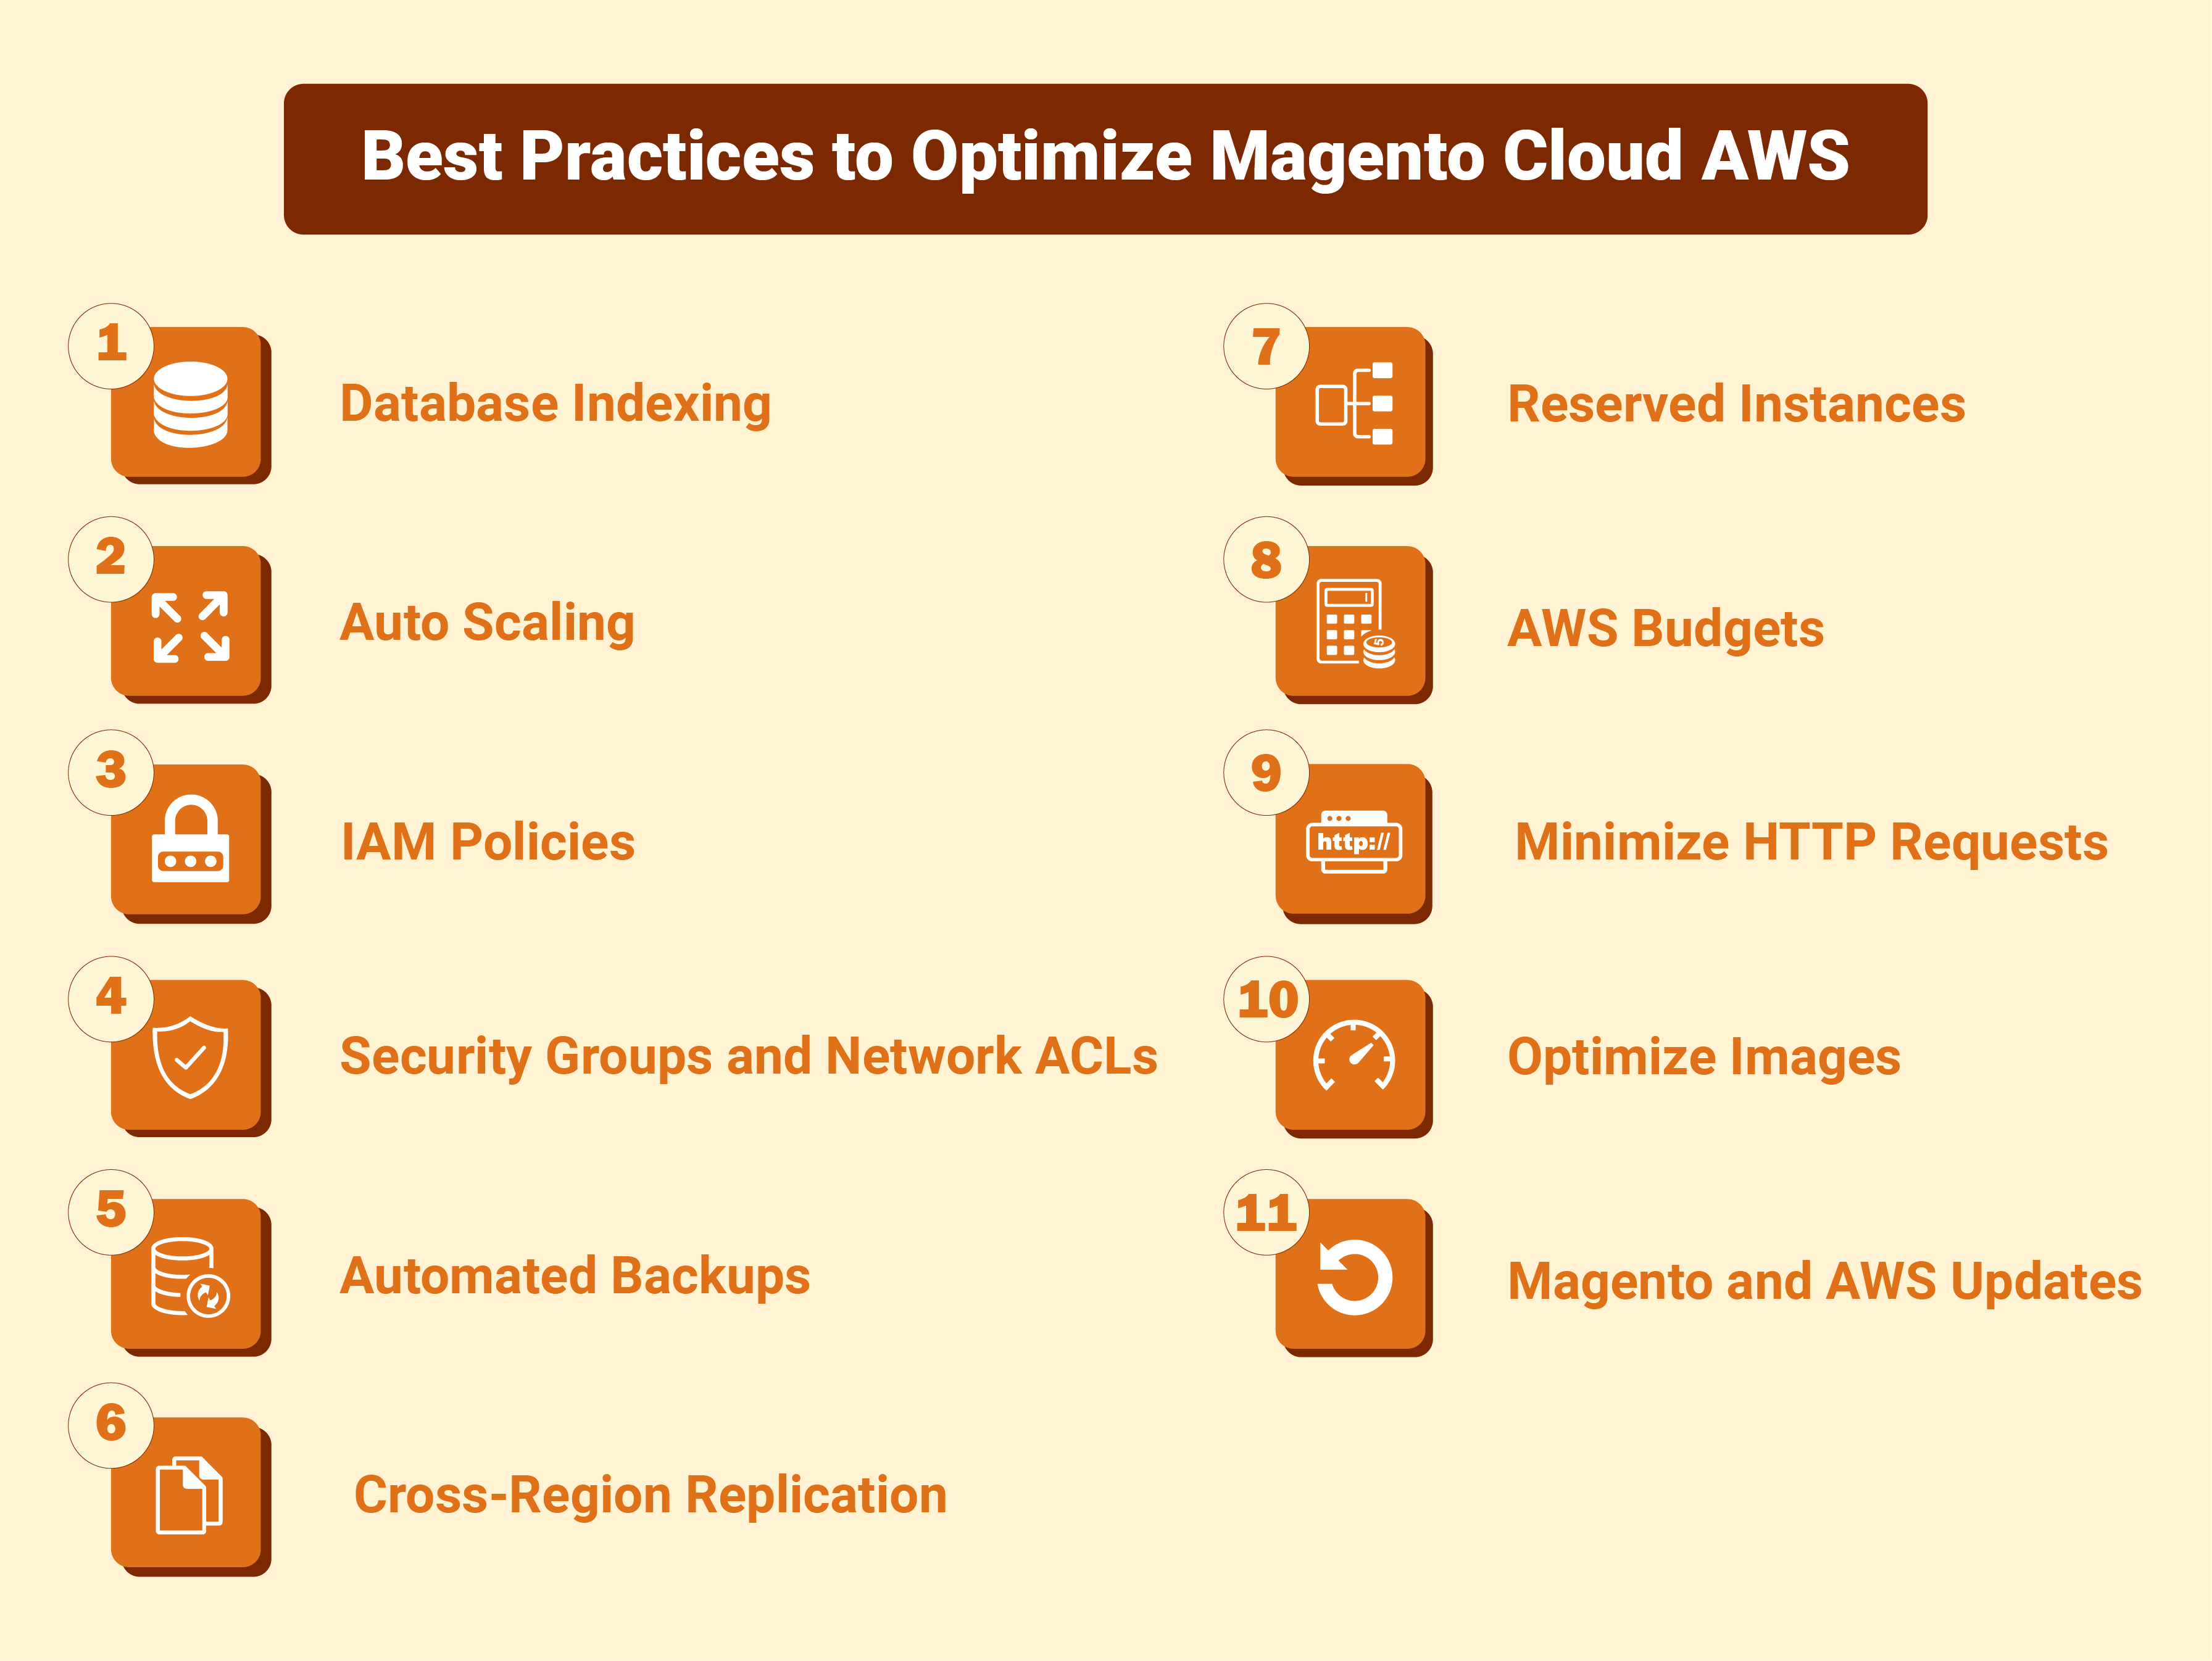 Best Practices to Optimize Magento Cloud AWS